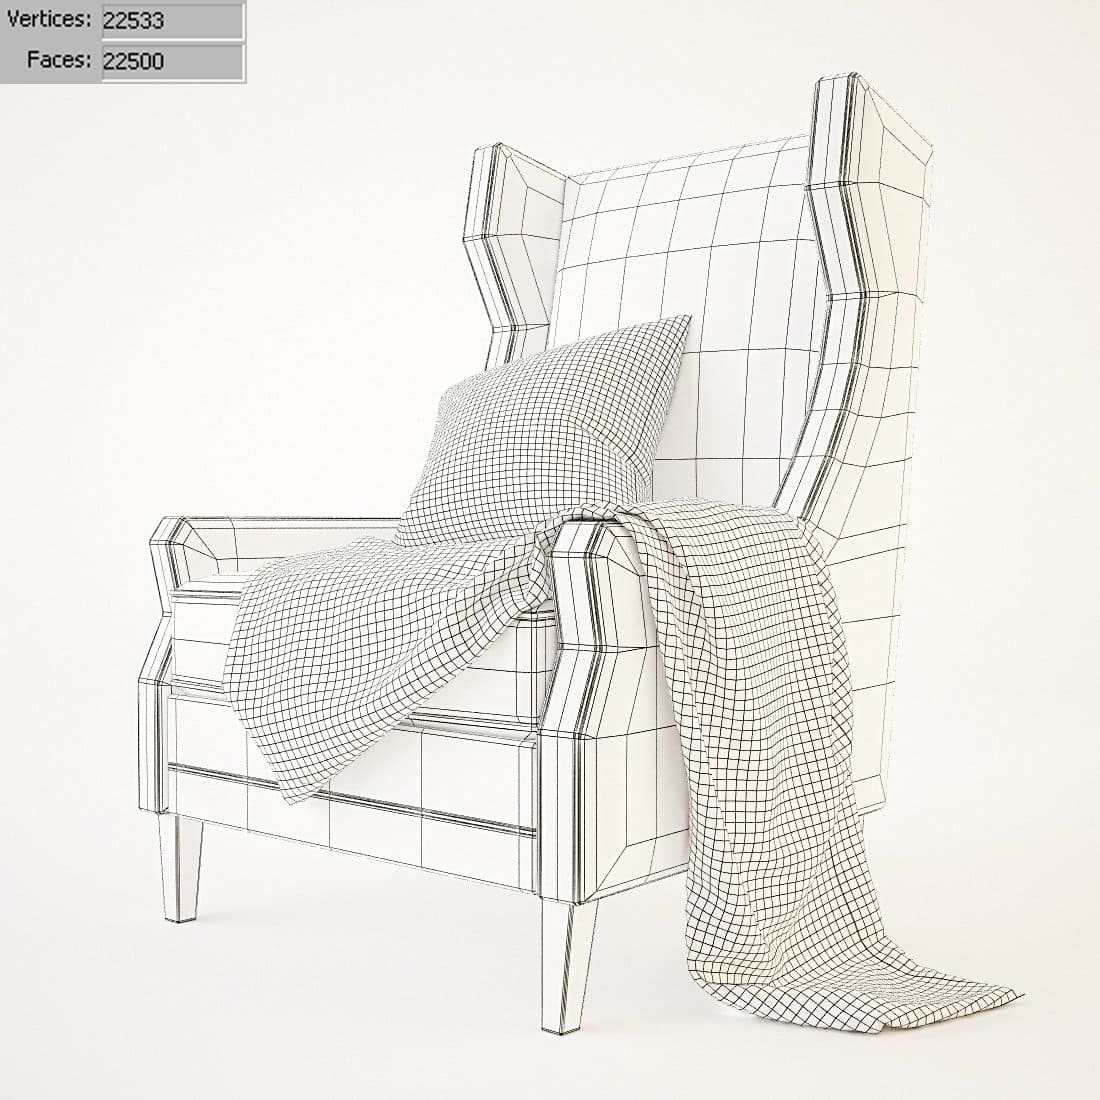 Mesh model of Rooma lucas chair with pillow and blanket.